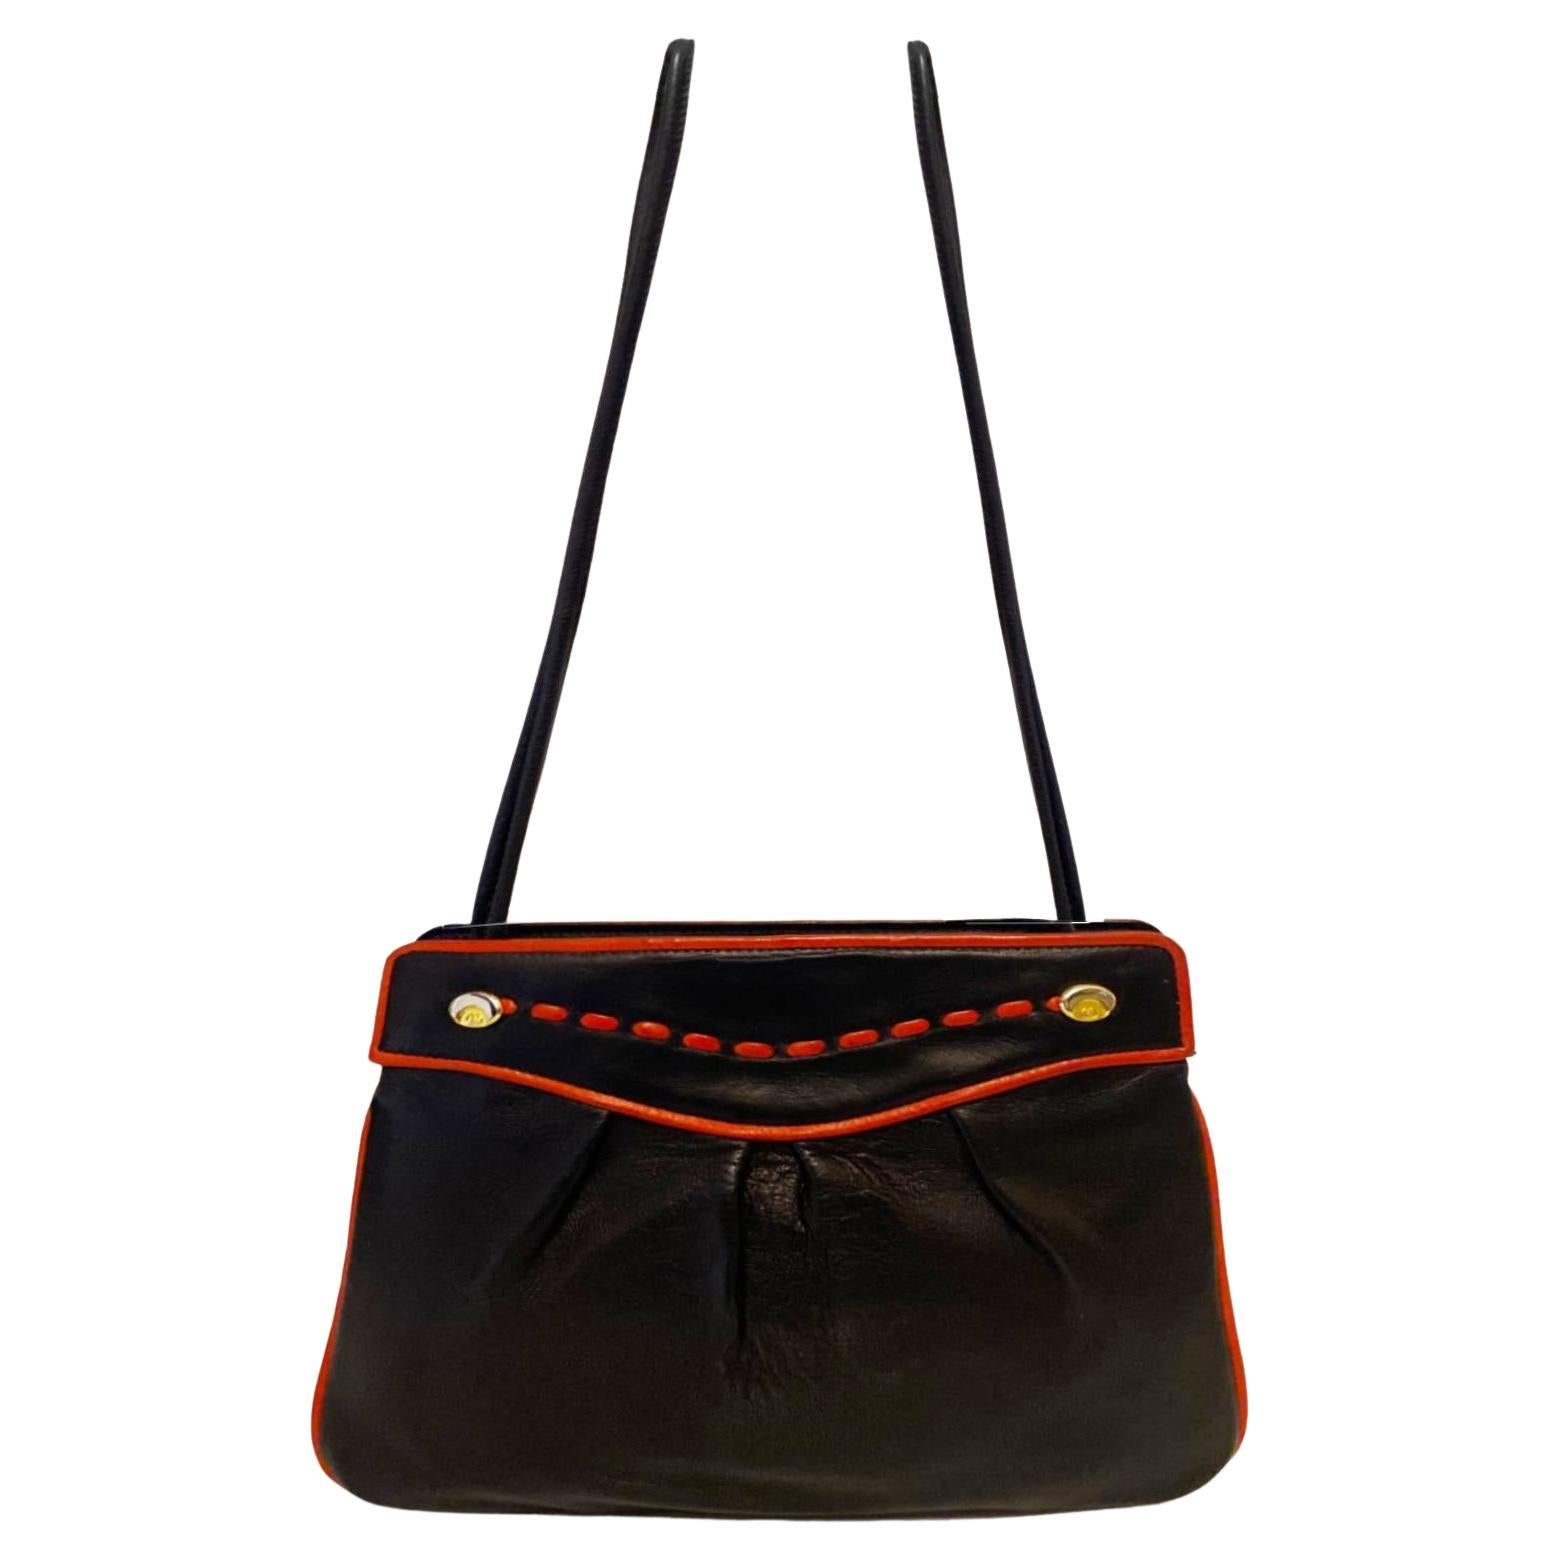 1960's Gucci Black Leather Shoulder Bag, double leather straps that run around the top of the bag, red leather line detailing, double logo in gold-tine metal badges, double compartments, clutch closure, Made in Italy by Gucci, 100% leather The